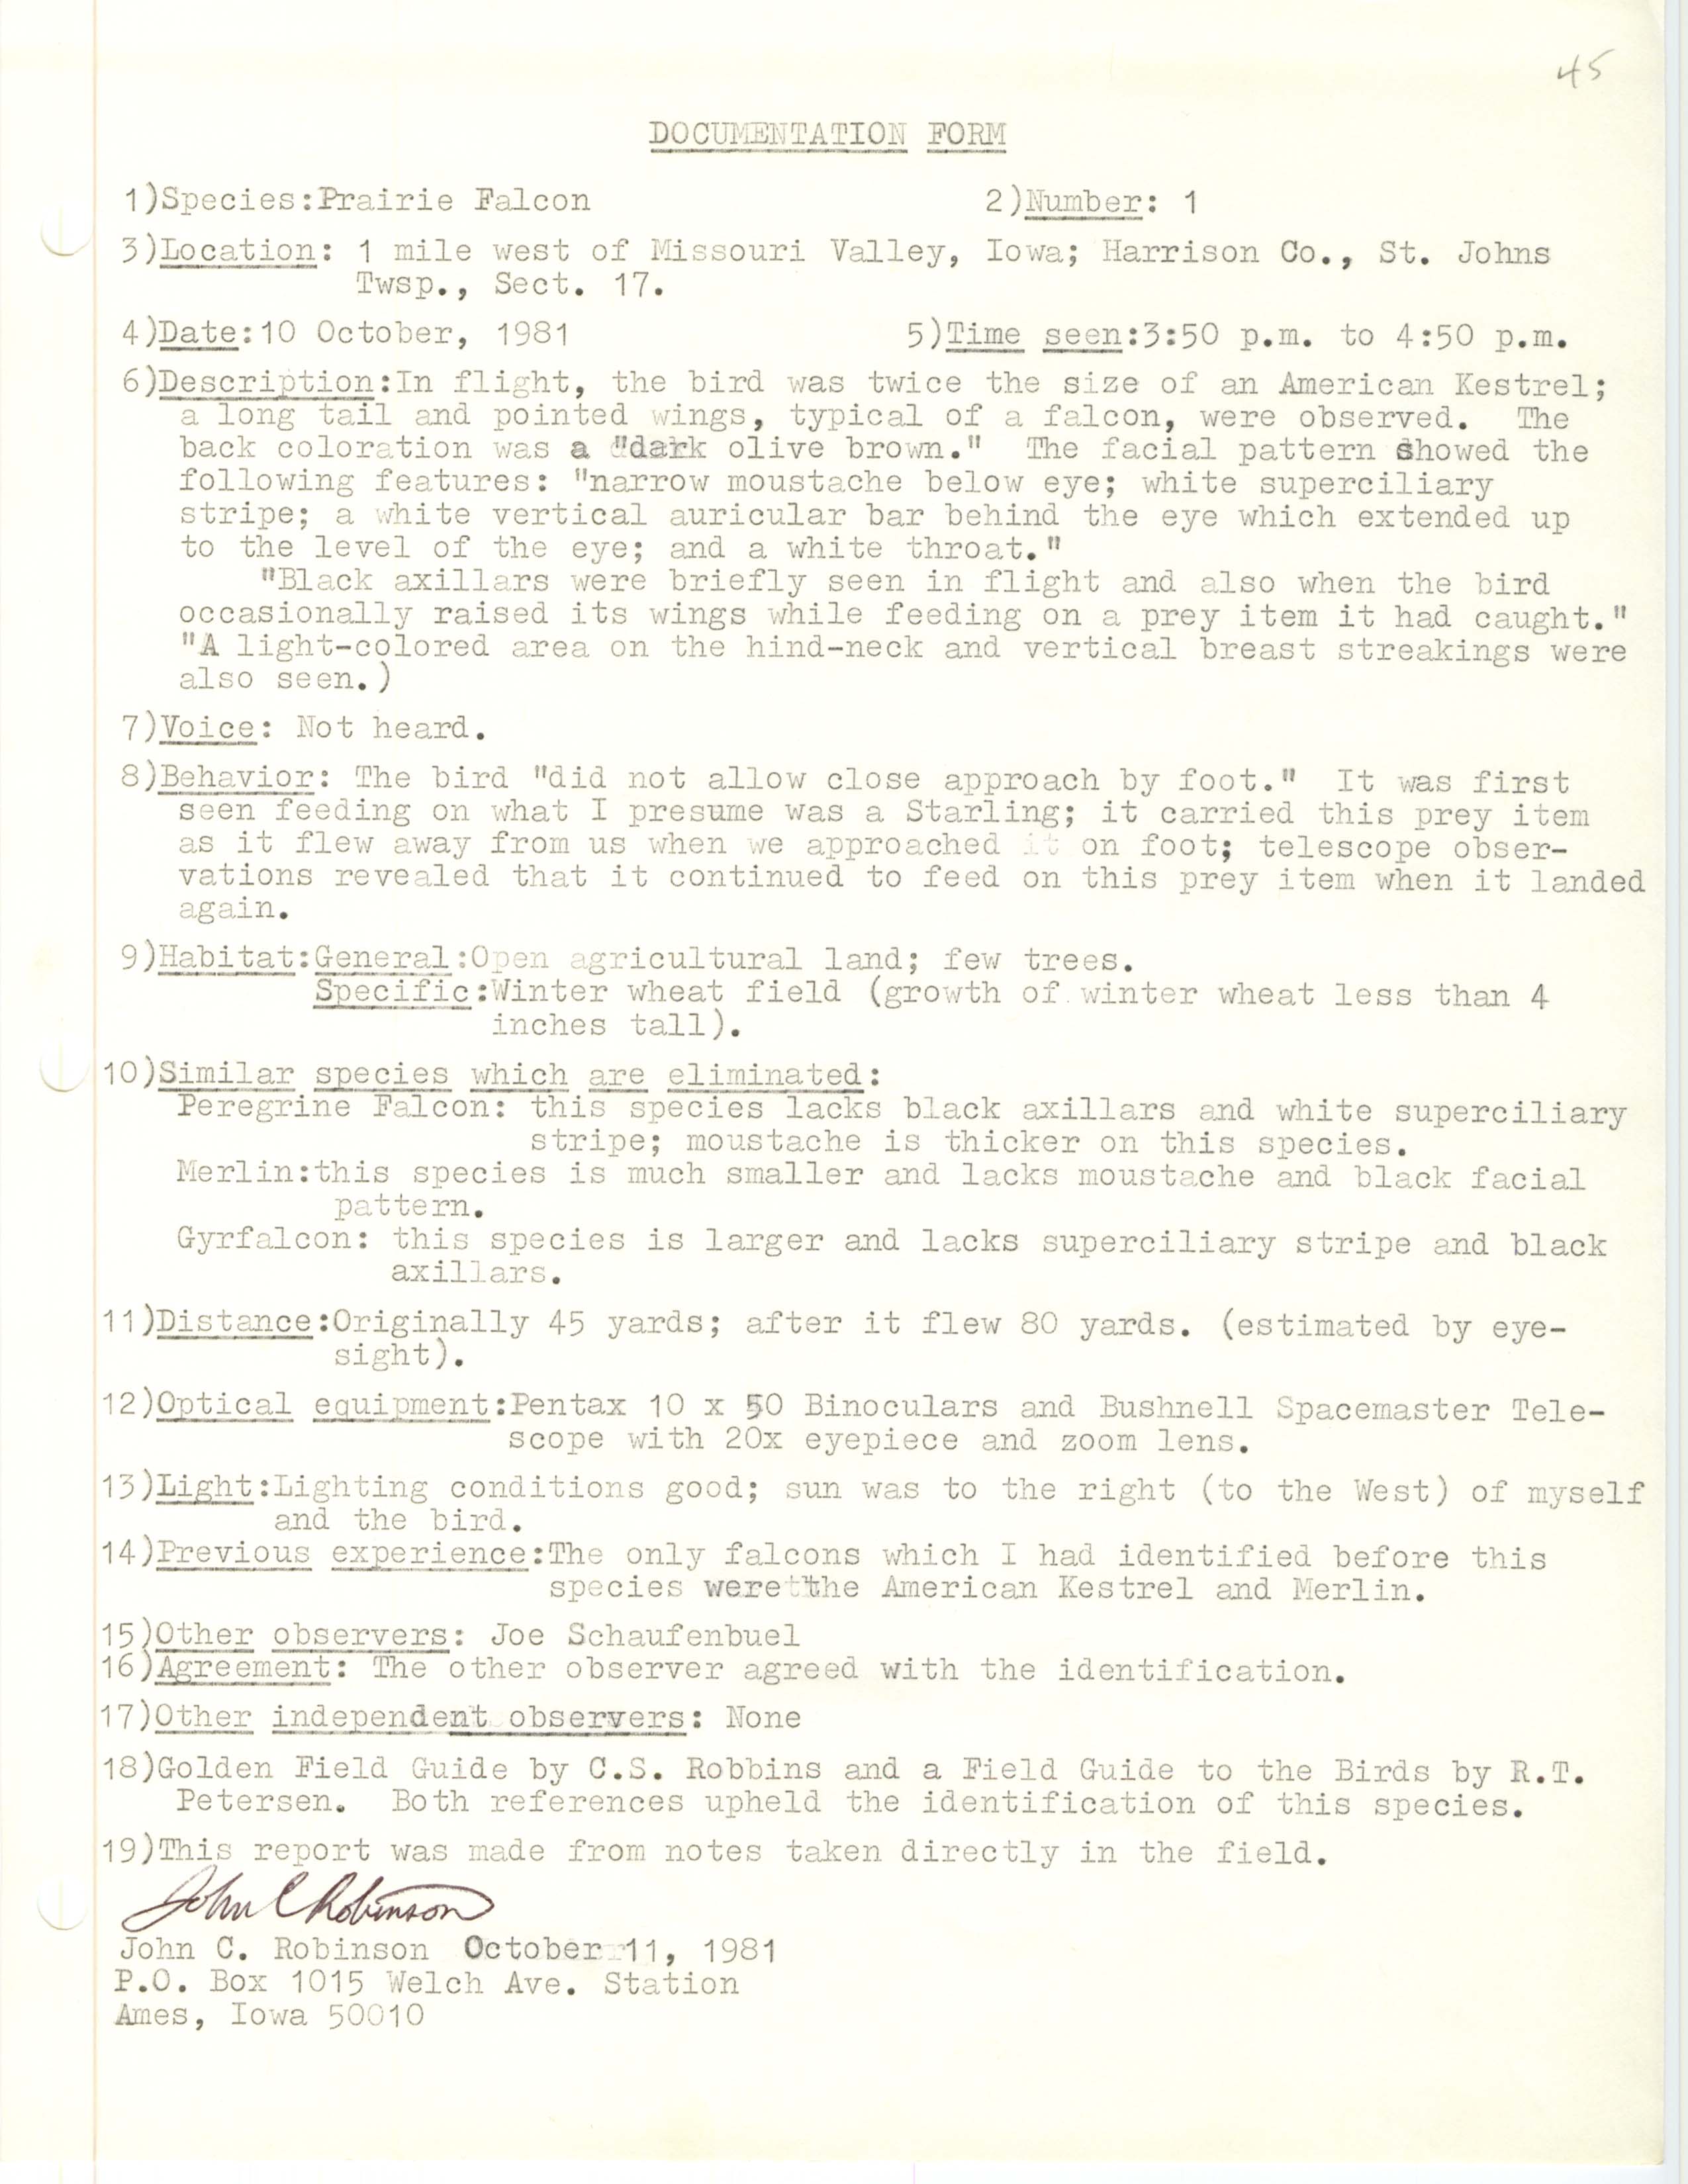 Rare bird documentation form for Prairie Falcon at St. Johns Township in Harrison County, 1981